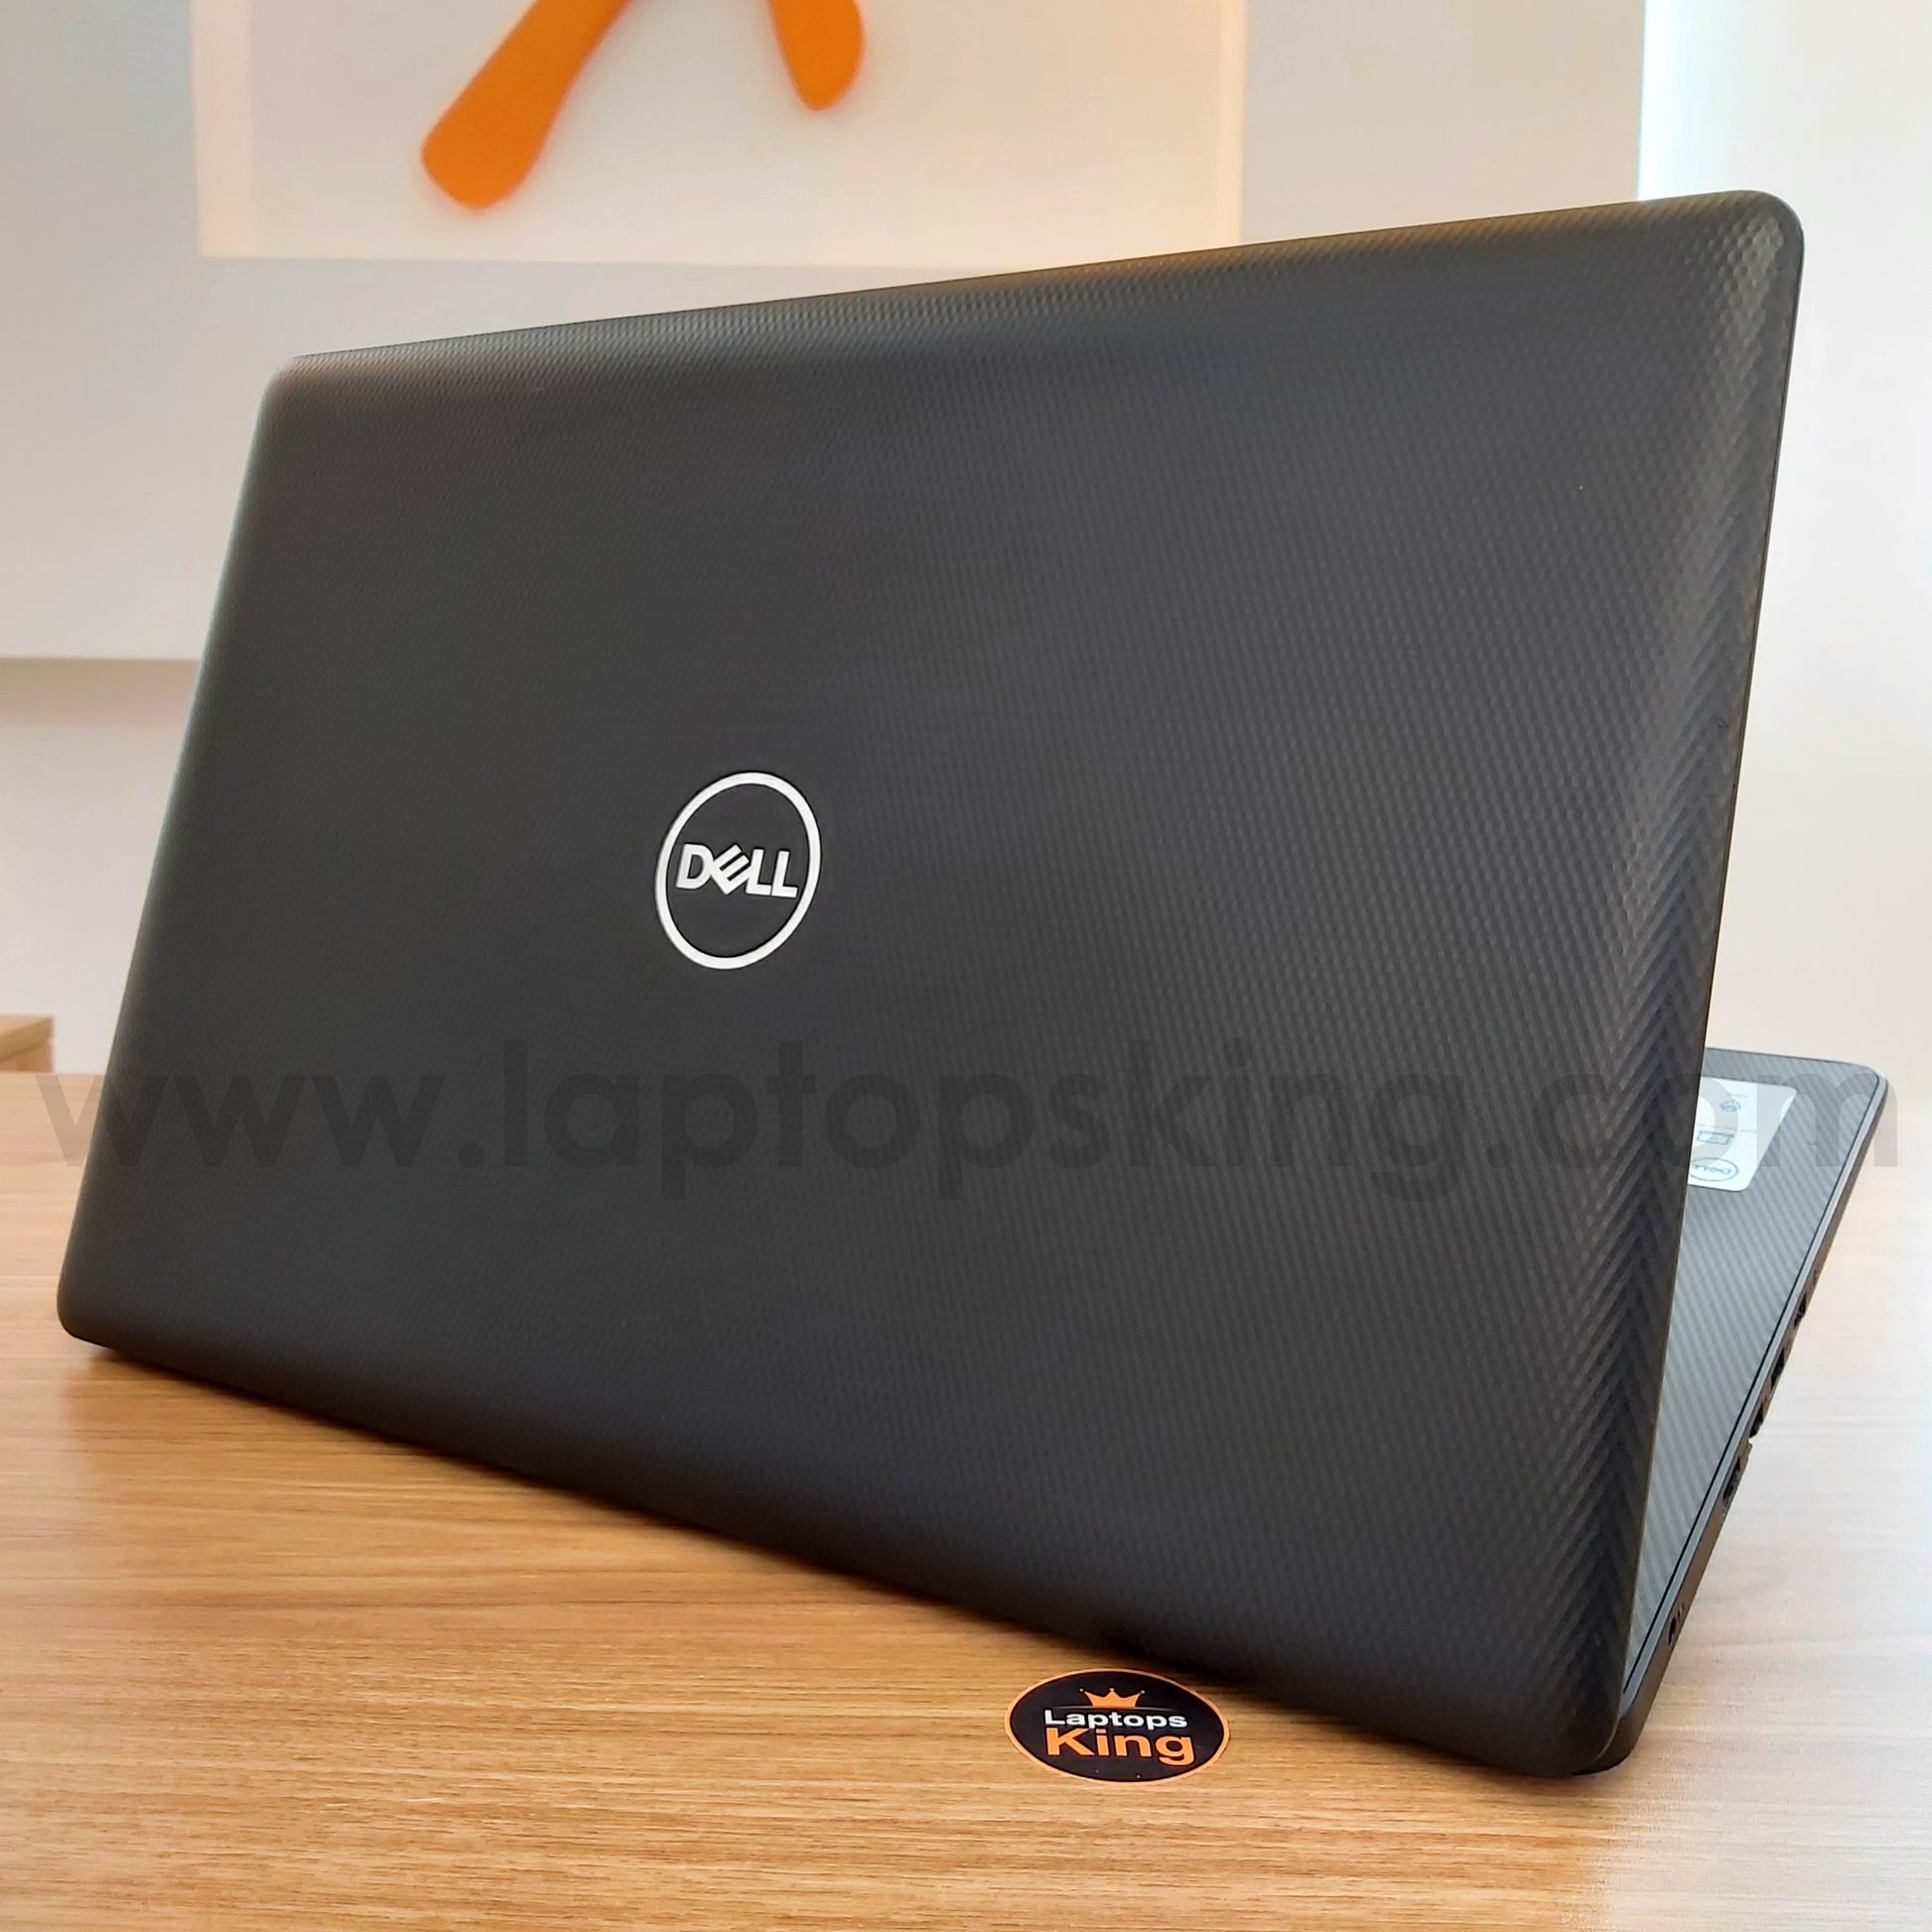 Dell Inspiron 3793 i5-1035G1 17.3" Laptop (Open Box) Gaming laptop, Graphic Design laptop, best laptop for gaming, best laptop for graphic design, computer for sale Lebanon, laptop for video editing in Lebanon, laptop for sale Lebanon, best graphic design laptop,	best video editing laptop, best programming laptop, laptop for sale in Lebanon, laptops for sale in Lebanon, laptop for sale in Lebanon, buy computer Lebanon, buy laptop Lebanon.